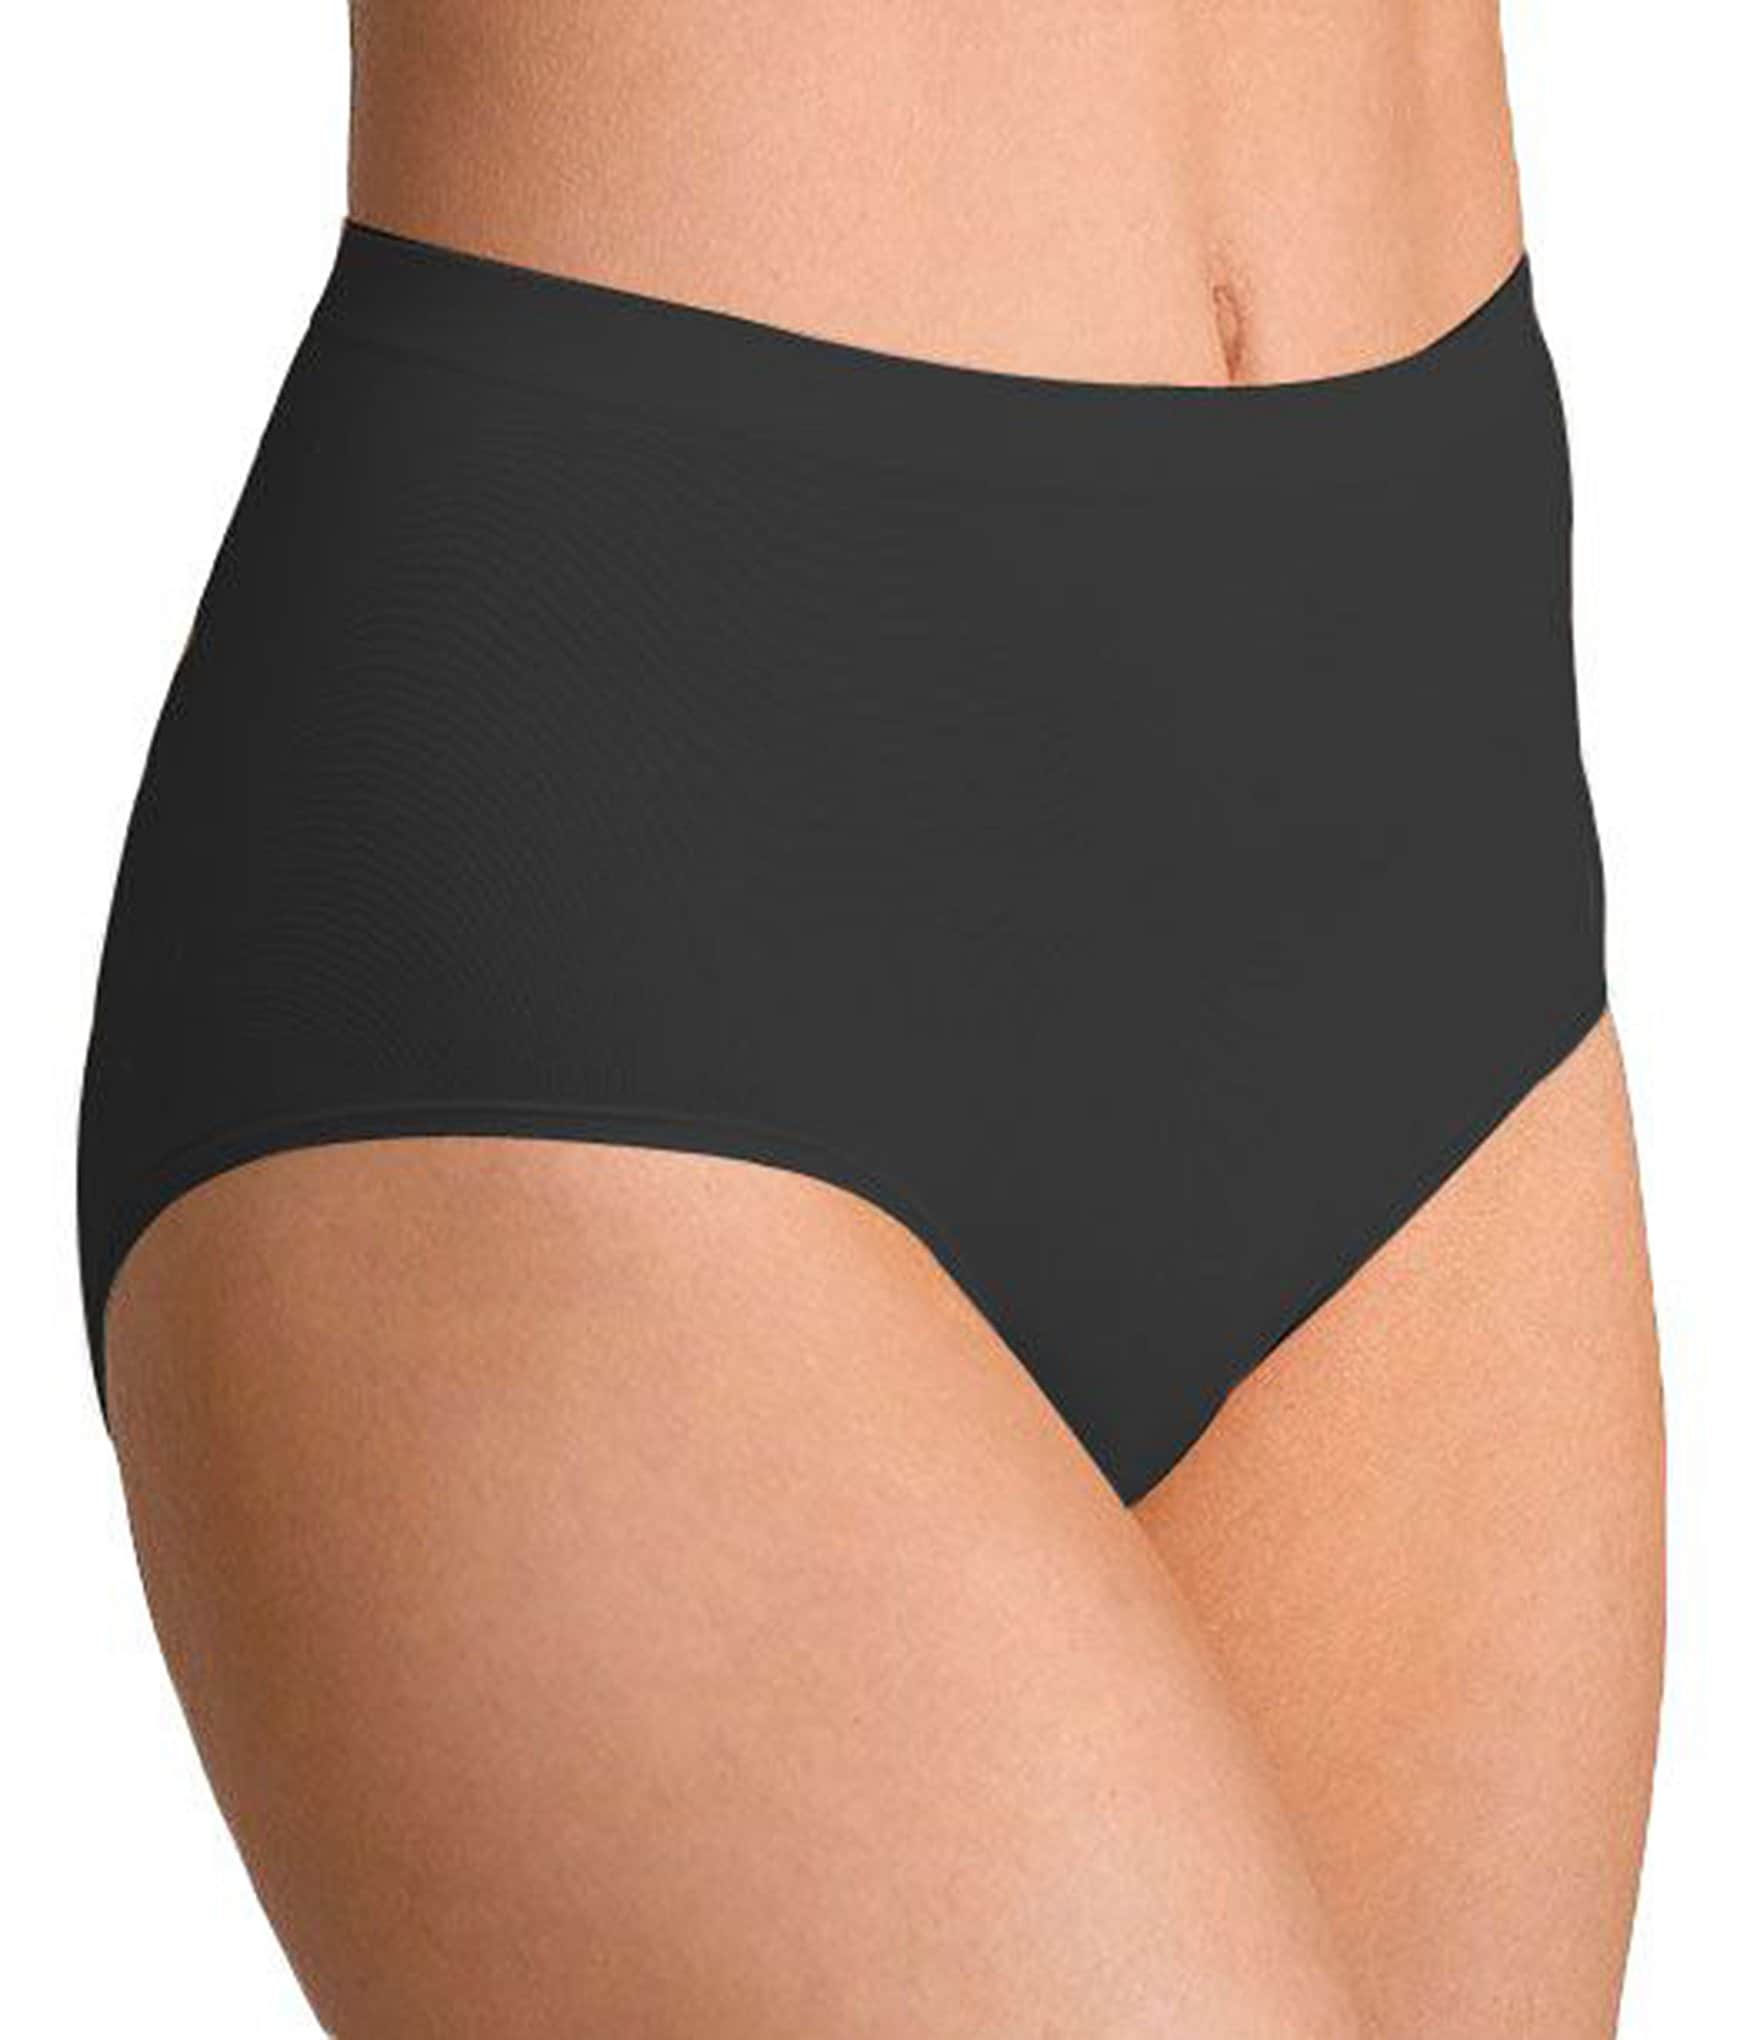 Find Seamless panties by Cloth Bazar near me